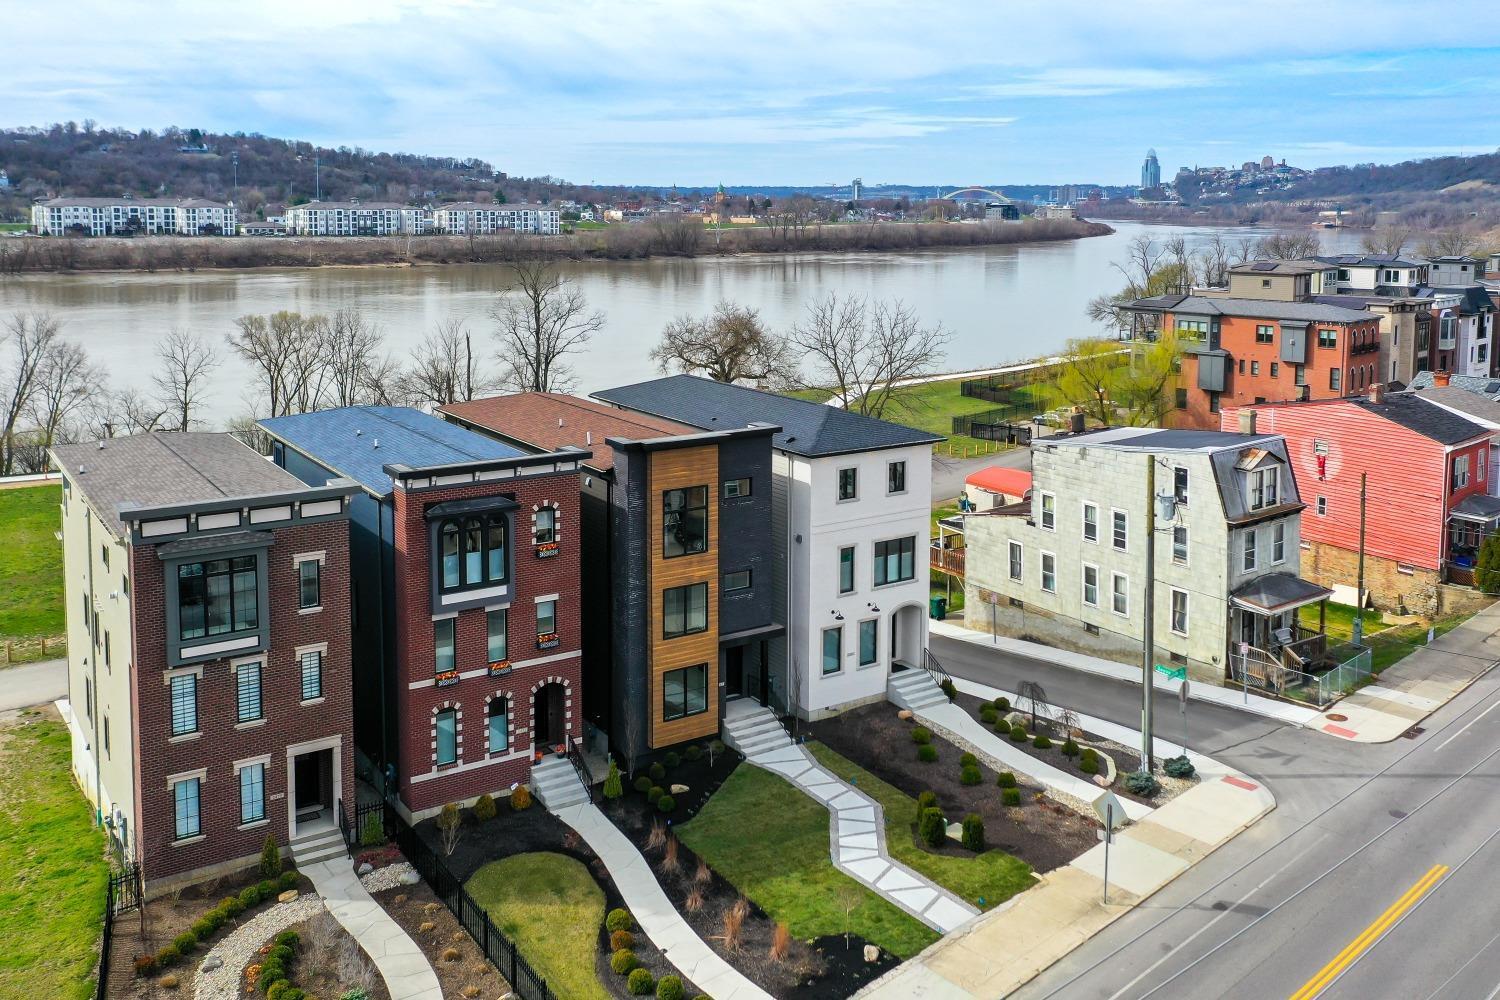 Another opportunity for Extraordinary River & City Views! We've already sold 17 gorgeous custom homes in this block & these 3 lots offer a limited opportunity to Custom Design your Tax Abated Dream Home in Eden! Quality Craftsmanship by Inman Construction highlights these Custom Built homes. Outstanding top flr outdoor living space overlooking the Ohio River & views of downtown. Includes elevator! This is your chance to Live the Good Life!